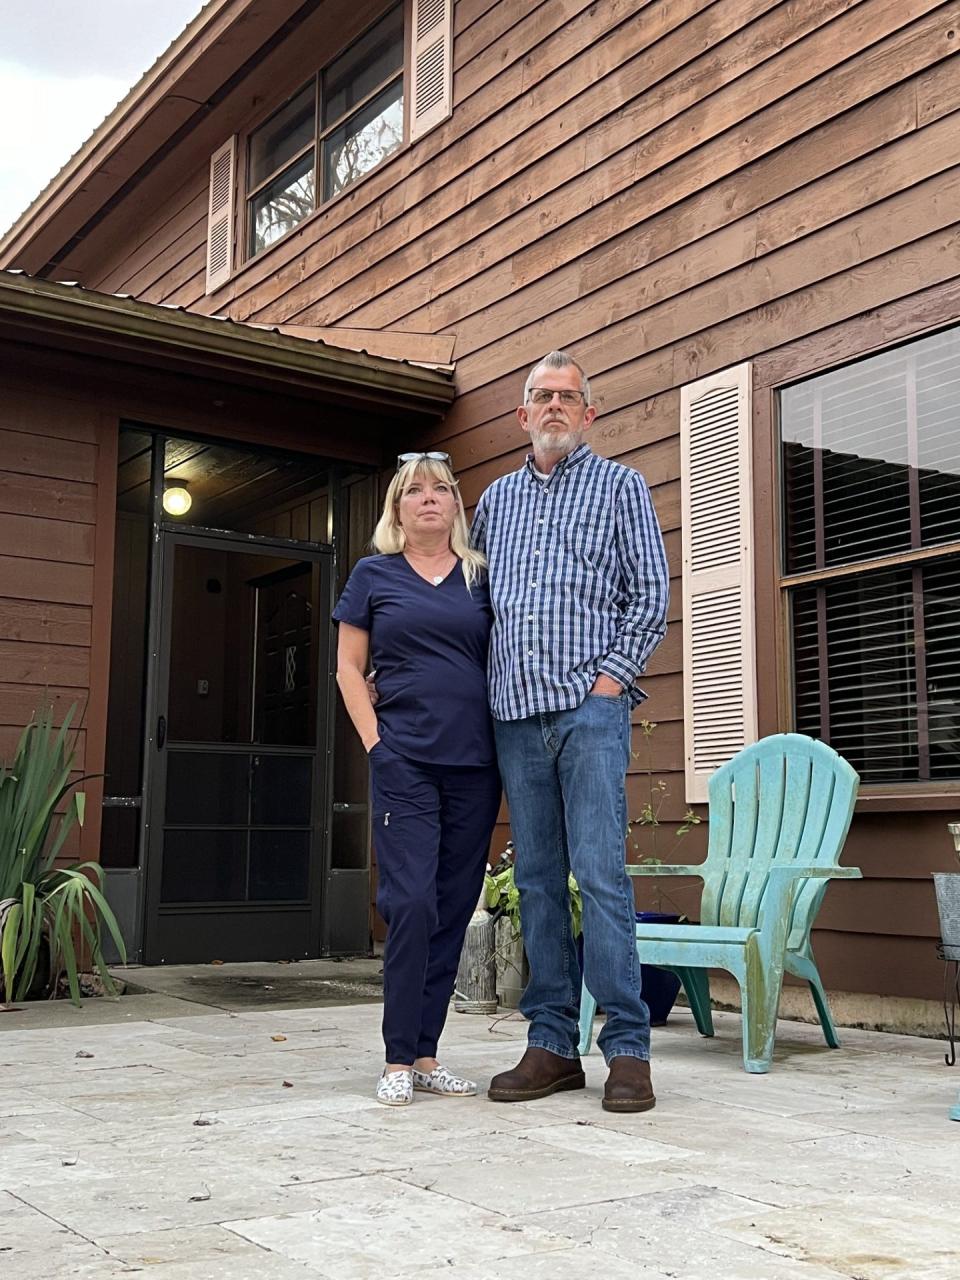 Patrick and Melissa Herlehy of Port Orange say Charles D. Ogden and his business formerly known as East Coast Countertops & Remodeling committed fraud, after they paid $48,000 of a $52,227 bill to repair to their home after Hurricane Ian. They say the business botched much of the job, and Ogden is facing felony charges on that matter as well as several others.